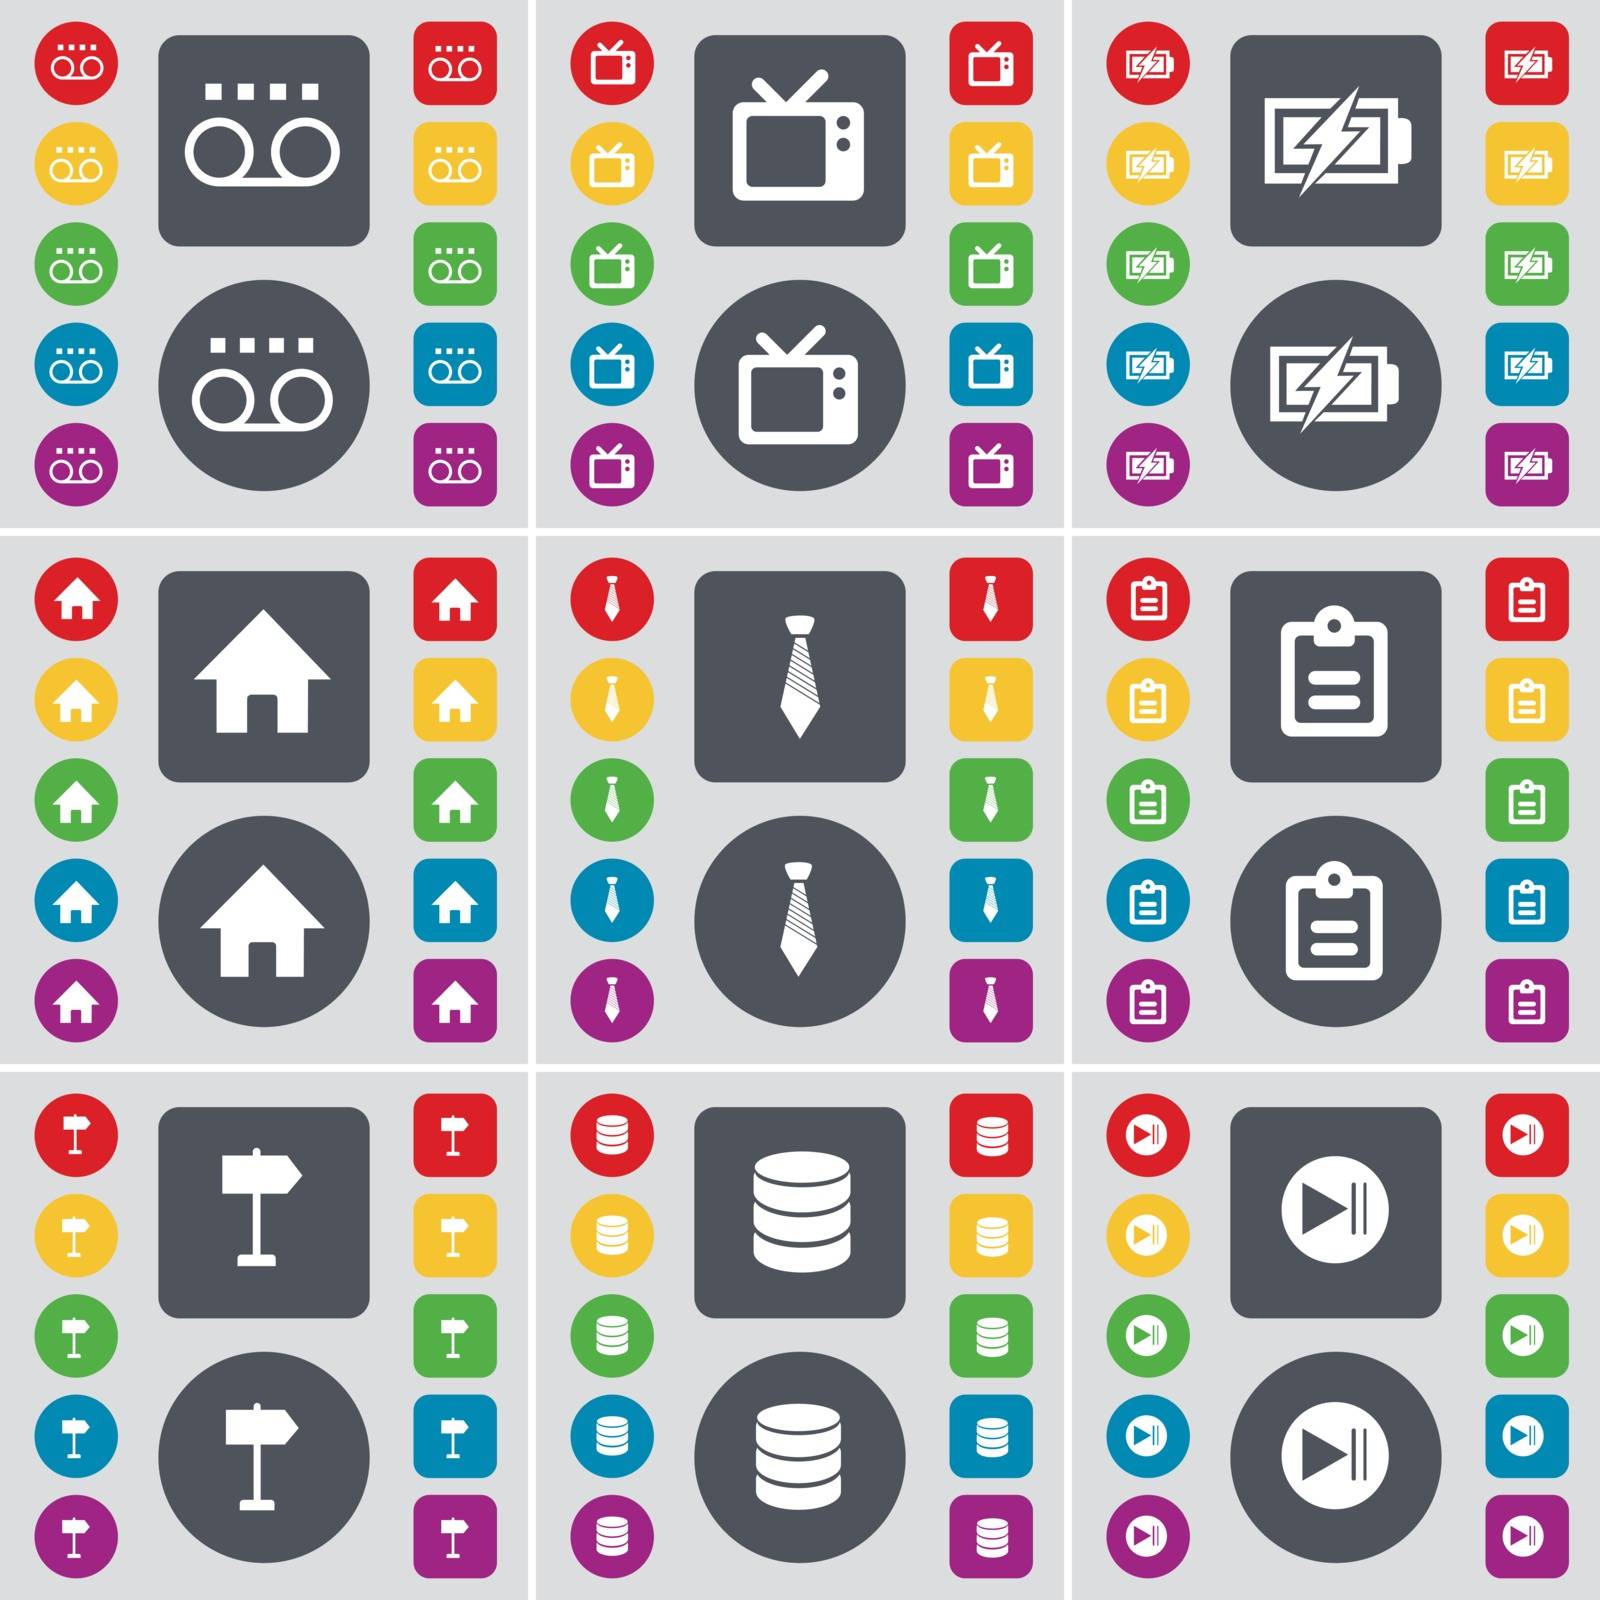 Cassette, Retro TV, Charging, House, Tie, Survey, Signpost, Database, Media skip icon symbol. A large set of flat, colored buttons for your design. Vector illustration